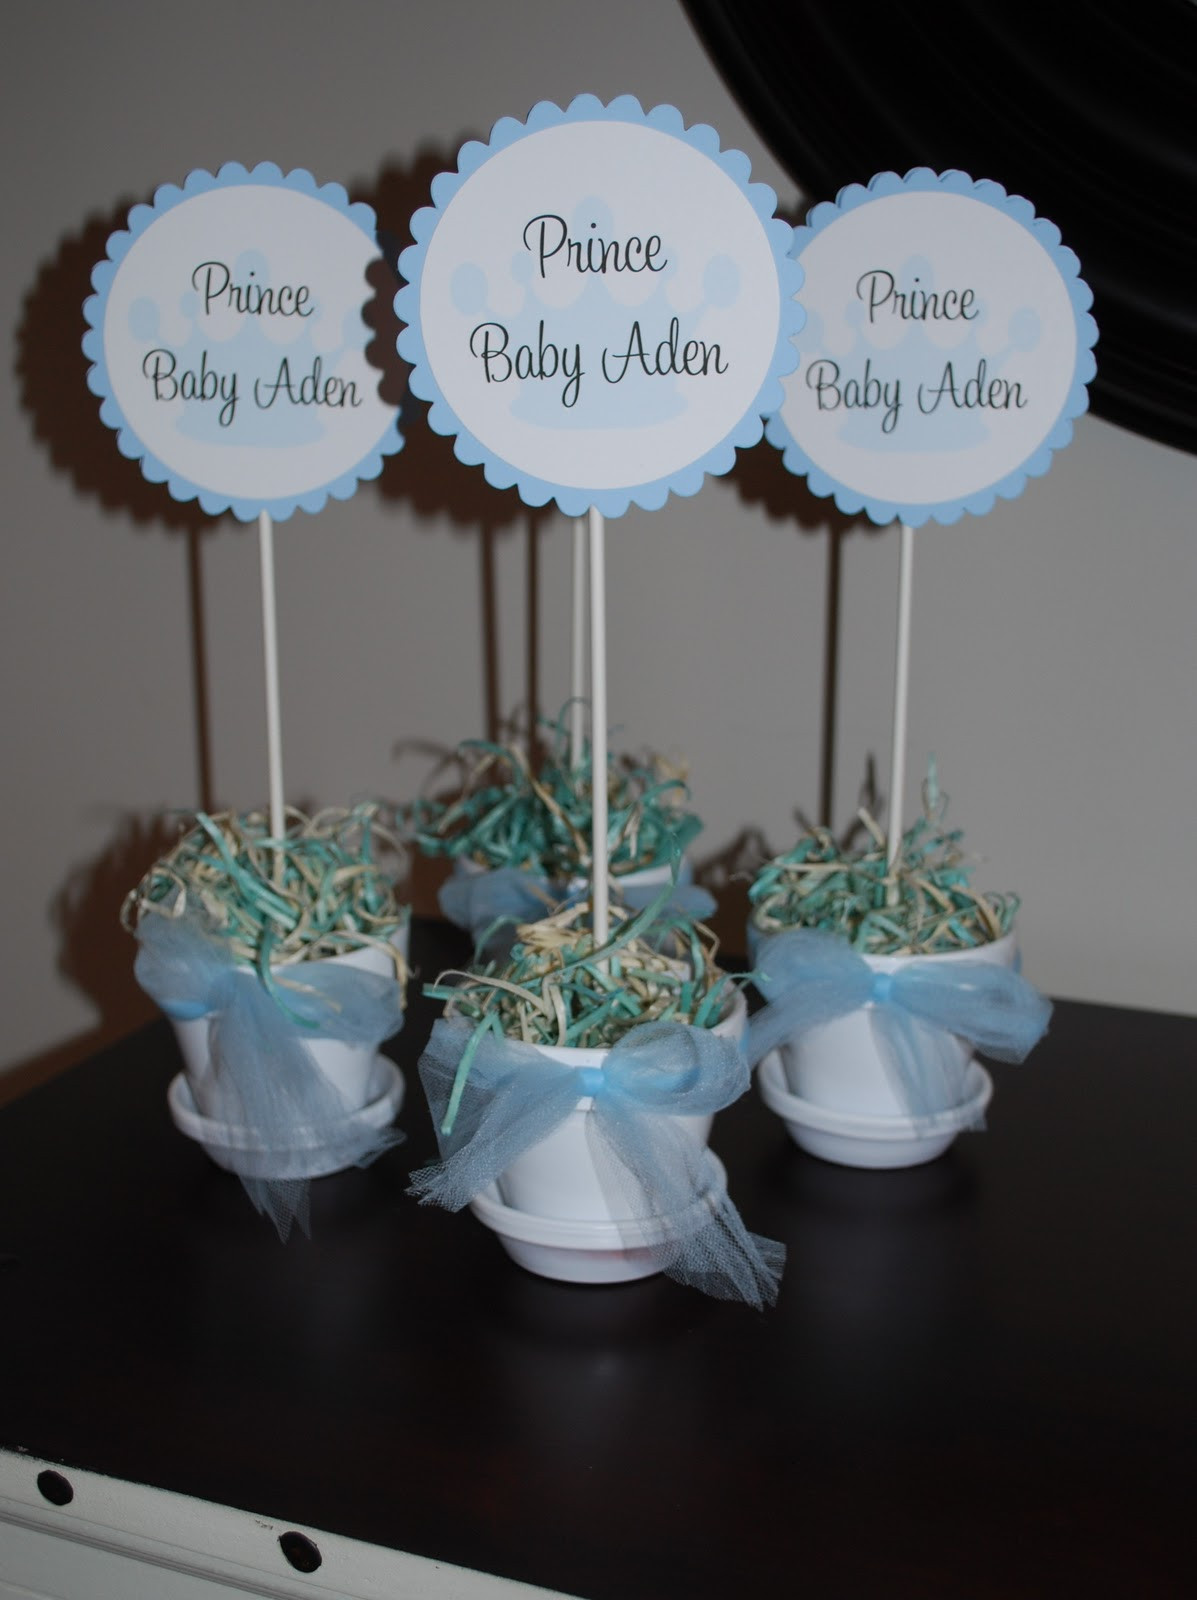 Table Decor For Baby Shower
 Sweet P Parties Prince Baby Shower